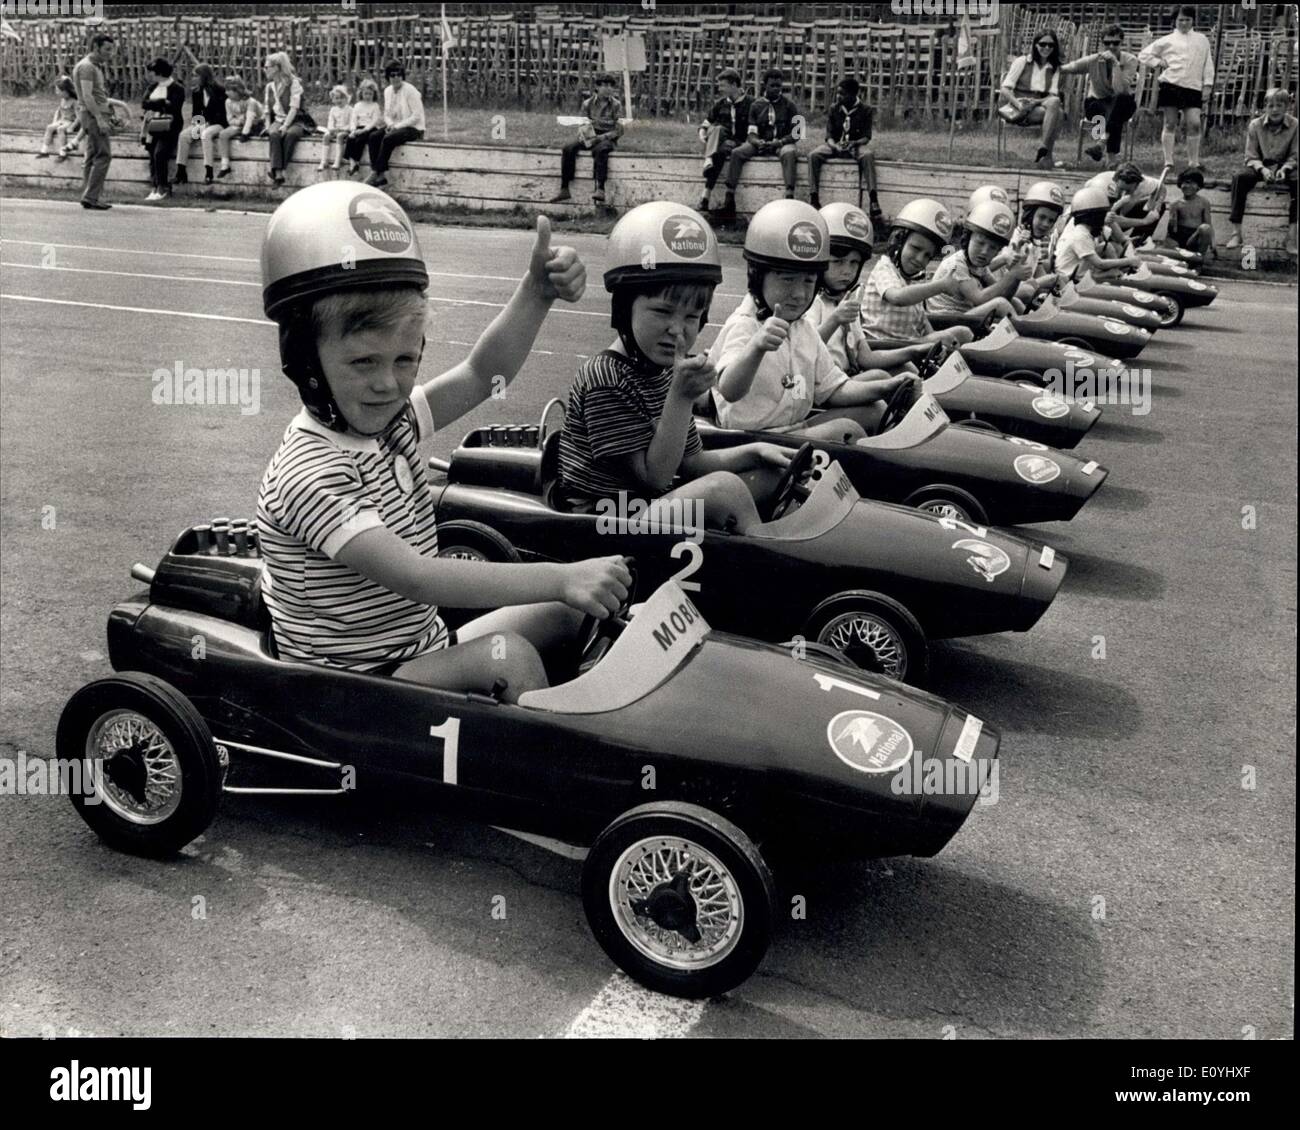 Jun. 07, 1970 - The Rac' Junior Grand Prix'' Race at Crystal Palace.: Britains's Young aspiring dirvers took part today in the Rac ''Junior Grand Prix''. The competitors were at the controlks of ''pedal-powered'' mini-racing cars as they made a 75-yards dash down a section of the motor racing circuit at Crystal Palace normally used by the more experienced racing drivers. The winner's prize was open to boys and girls aged 6 and under Photo shows The young competitors give the ''thumbs-up'' sign as they line up for the start of the race. Stock Photo